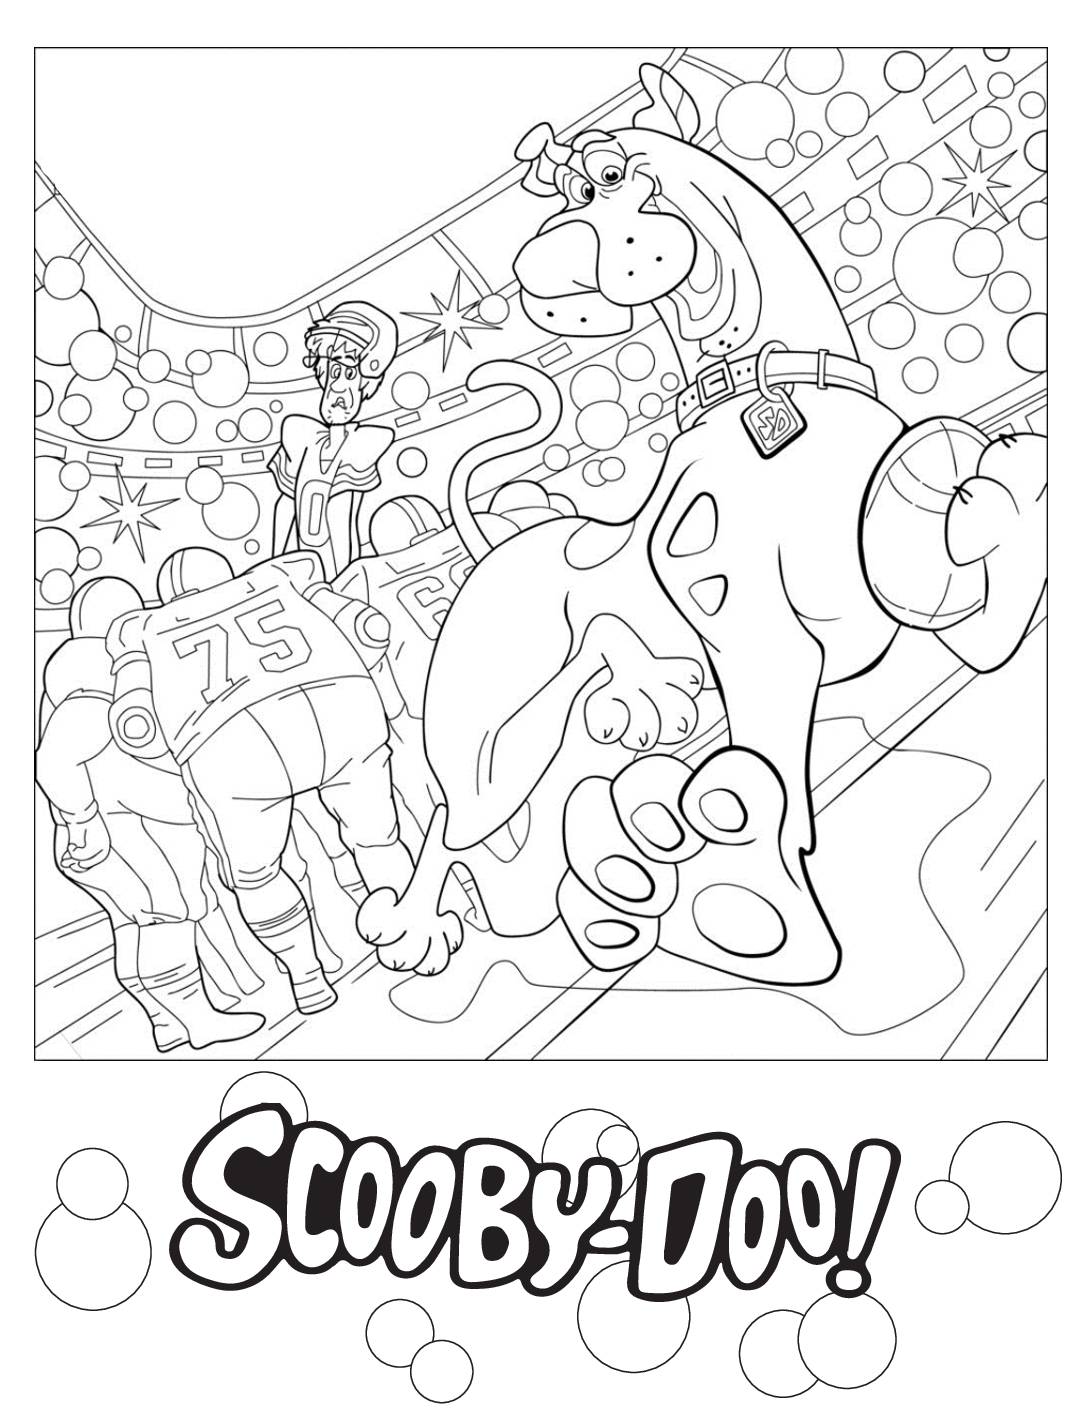 Coloring Page 2 Scooby Doo